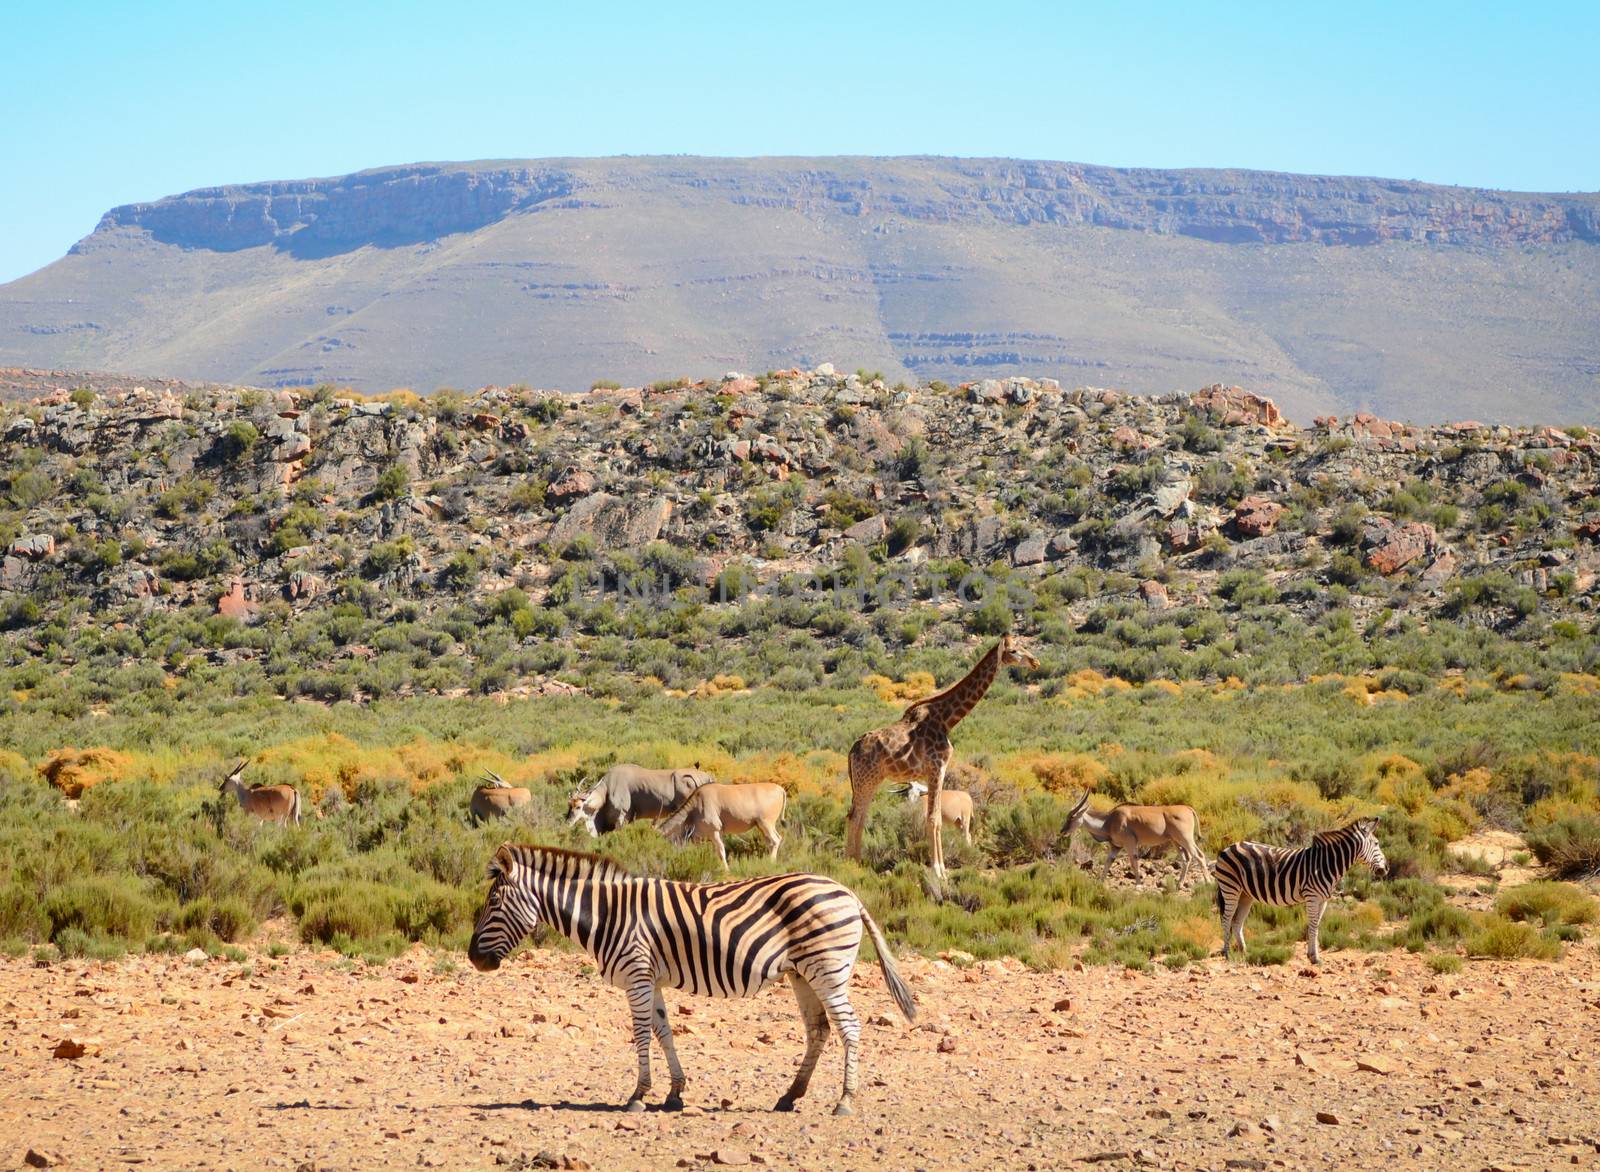 Zebra and group animals in yellow savanna against the mountain, Africa